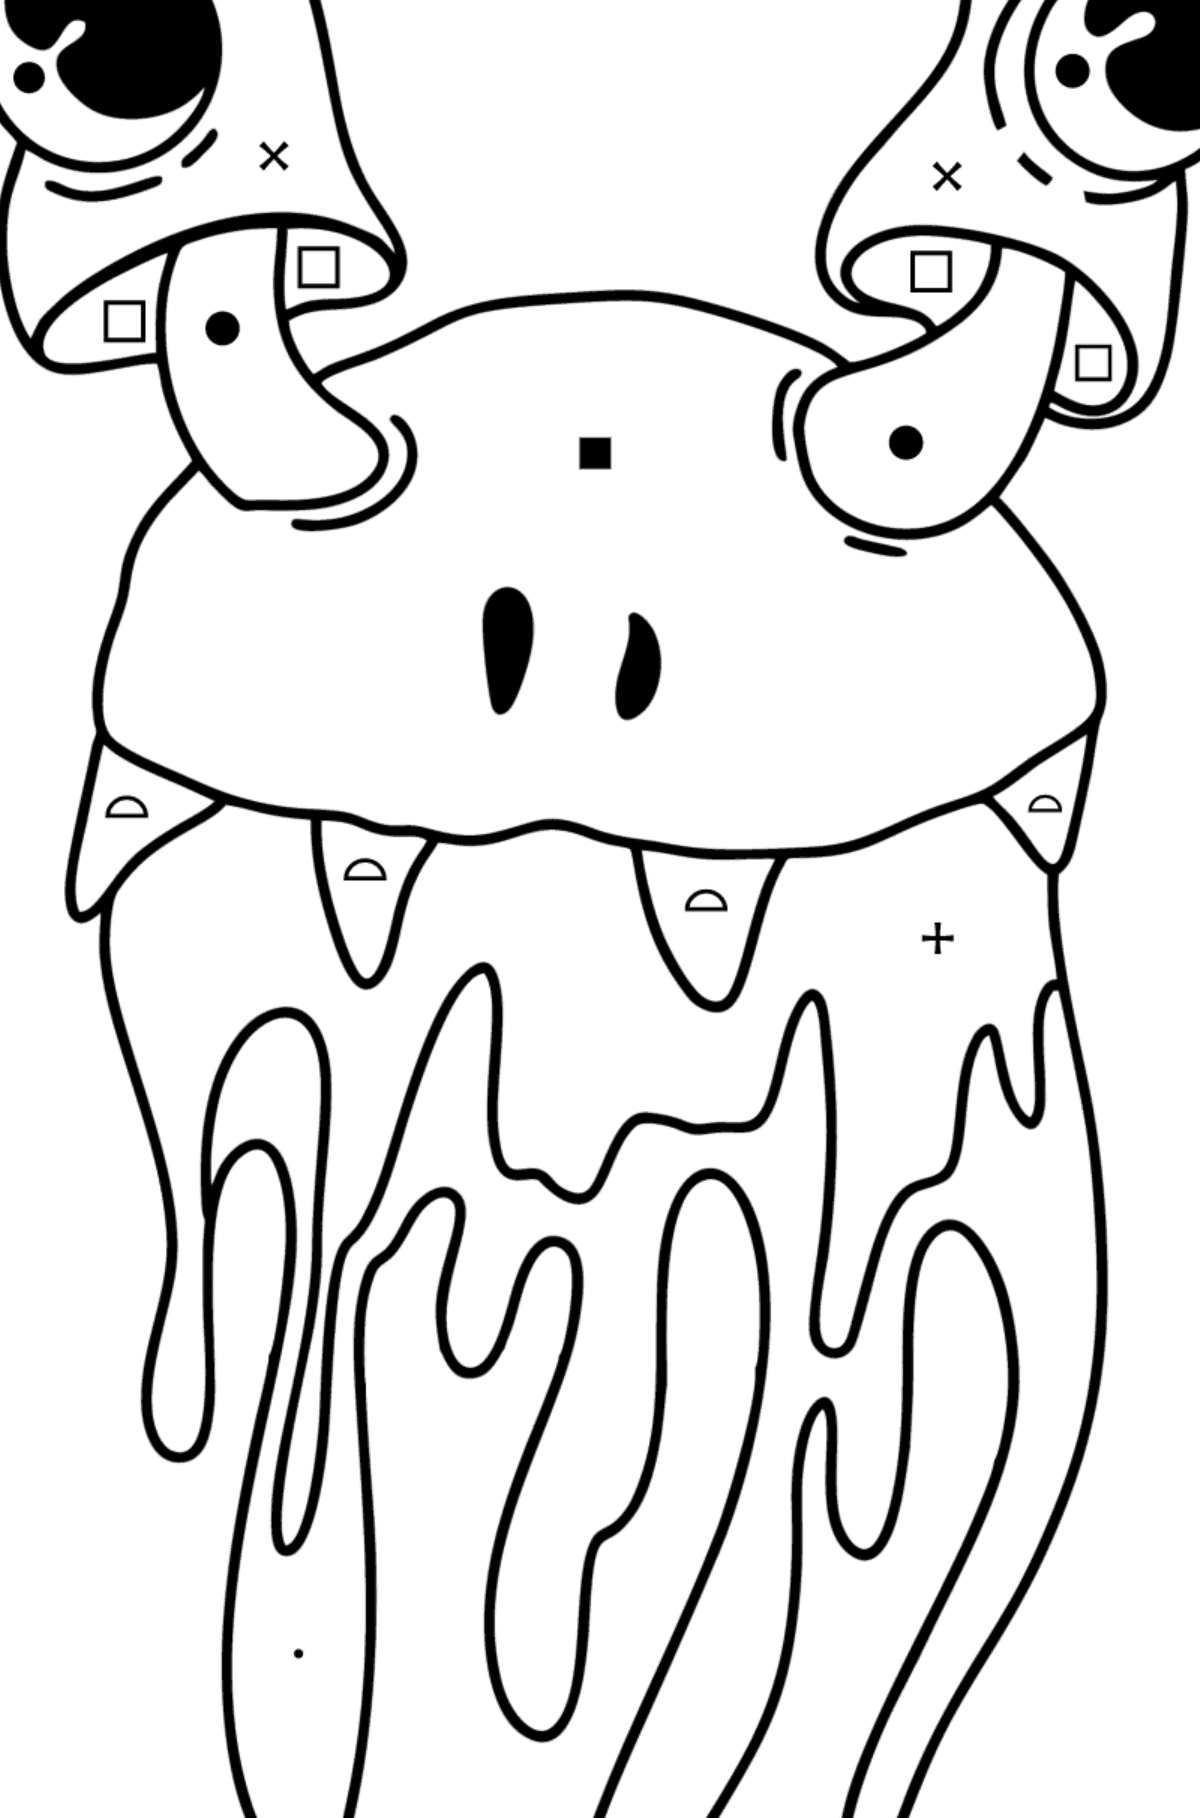 Cartoon monster face coloring page - Coloring by Symbols and Geometric Shapes for Kids